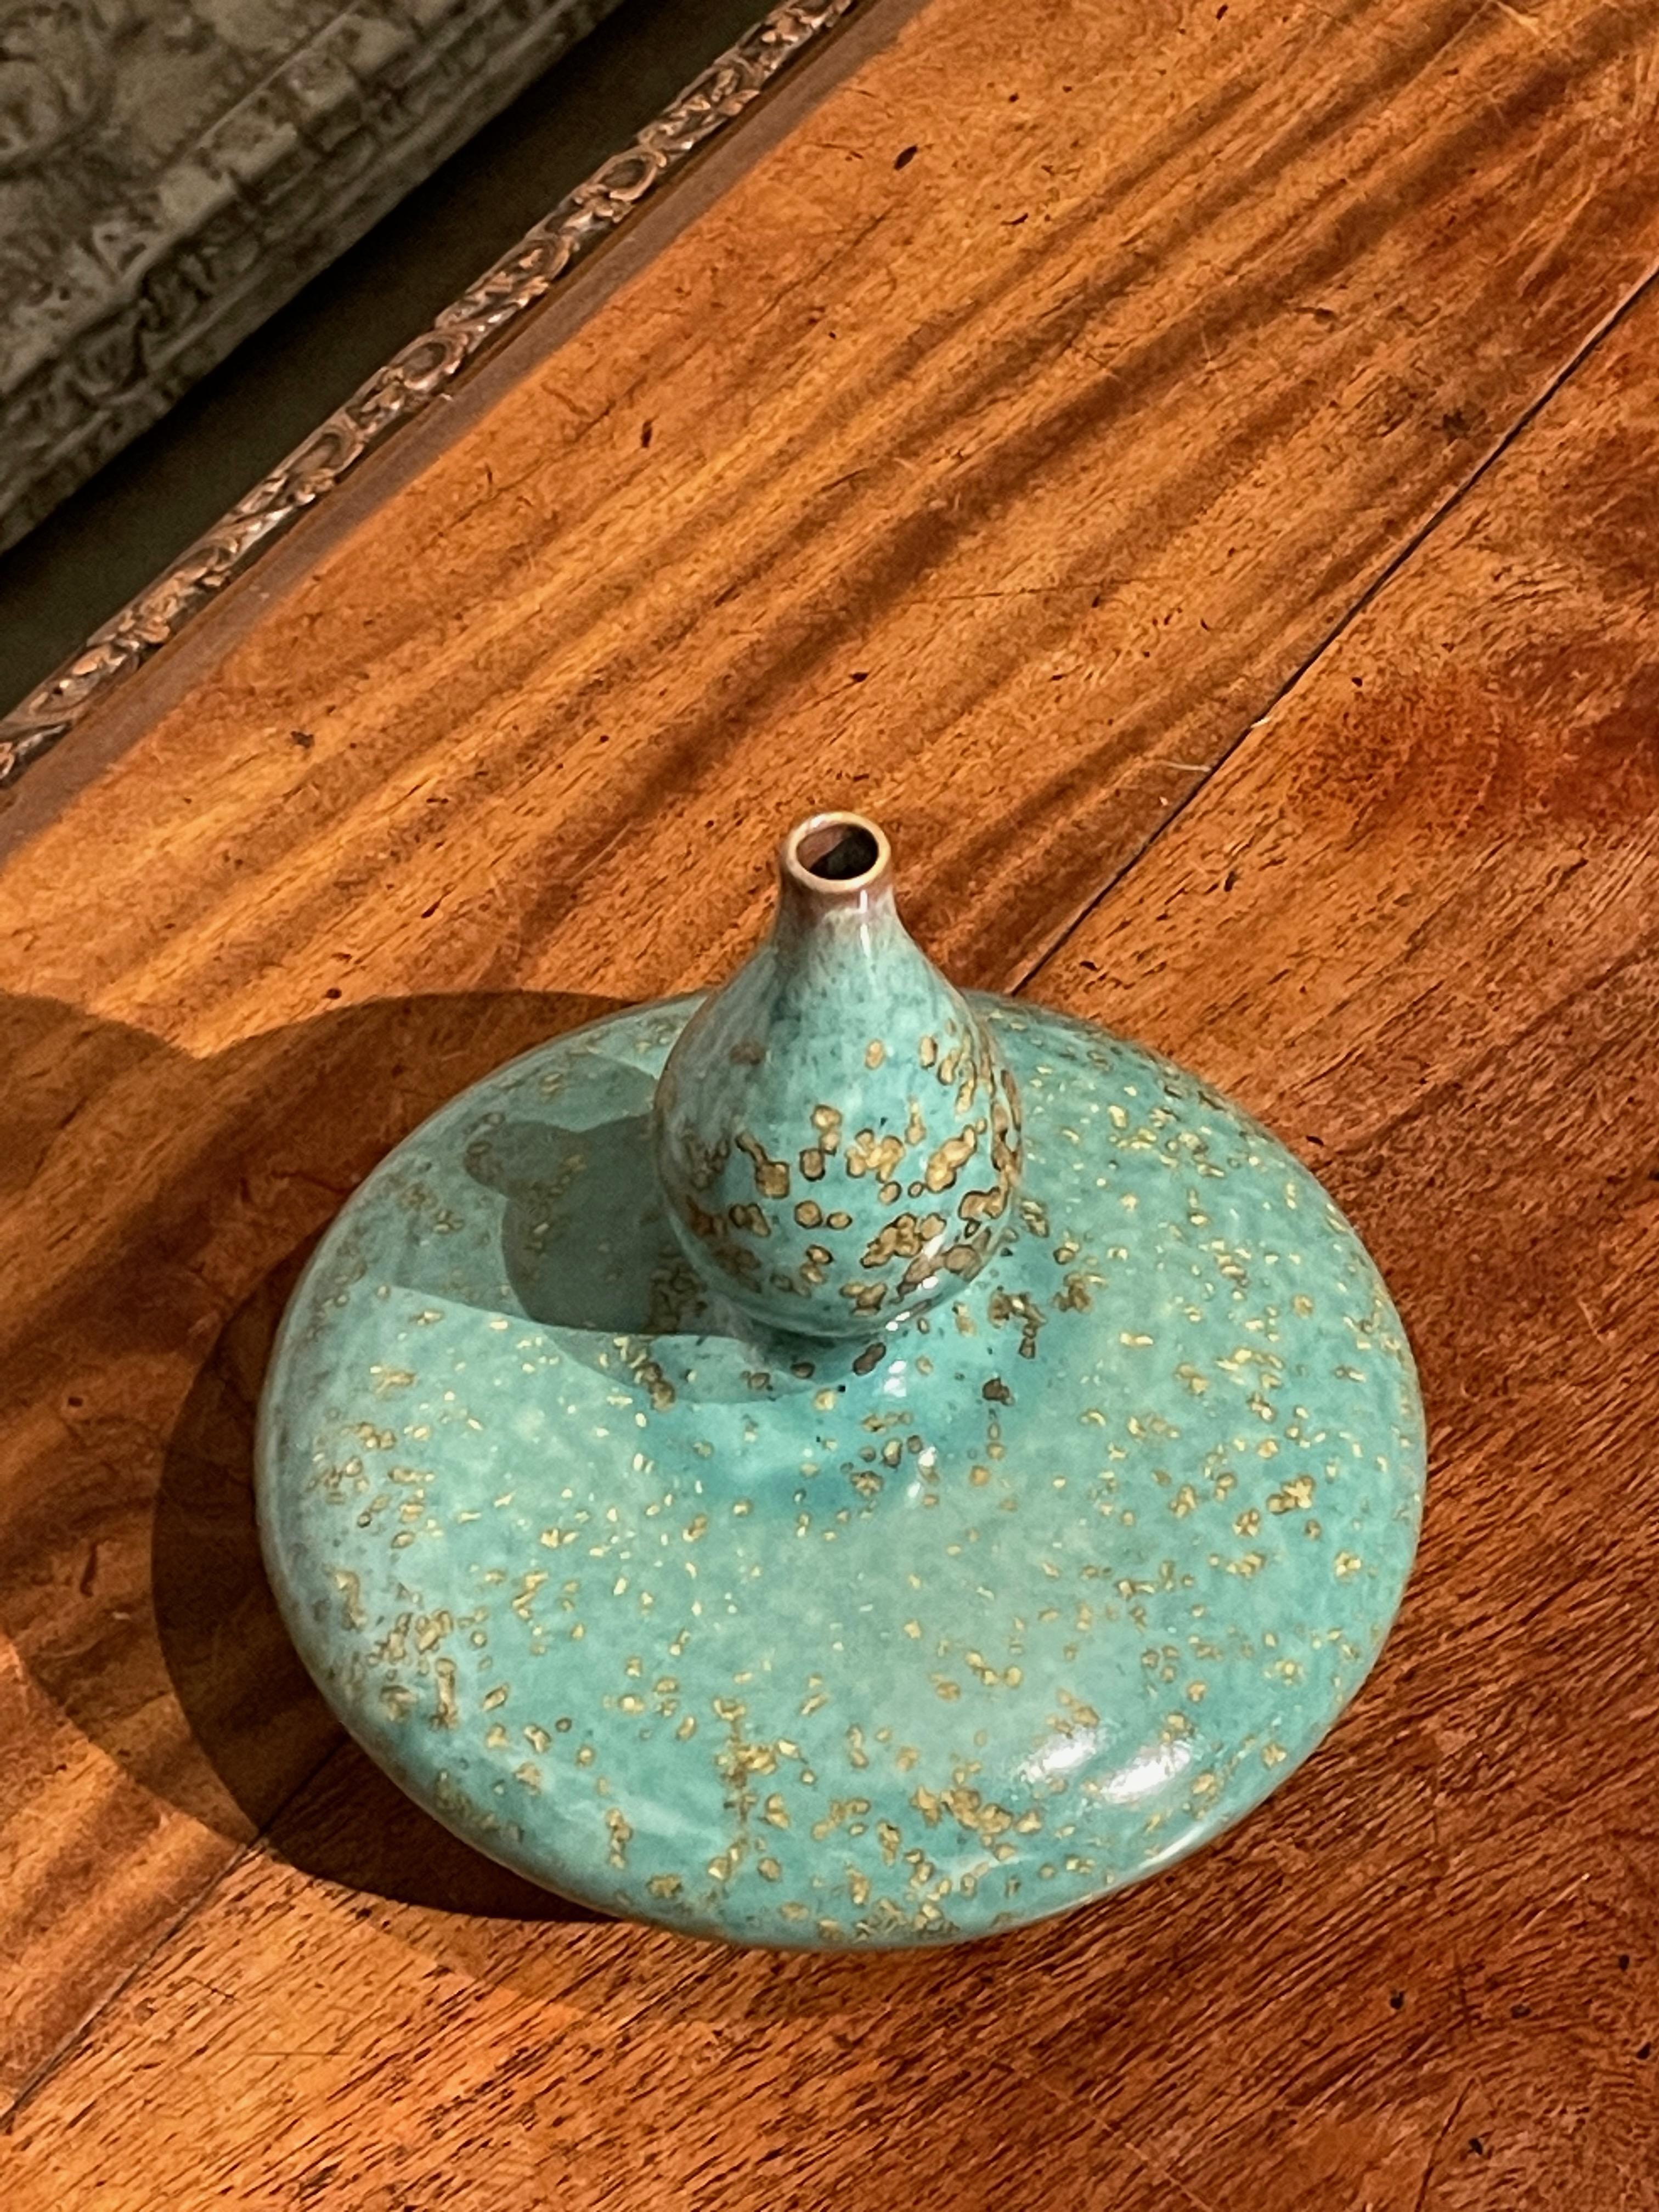 Chinese Turquoise with Gold Speckled Glaze Squat Shape Vase, China, Contemporary